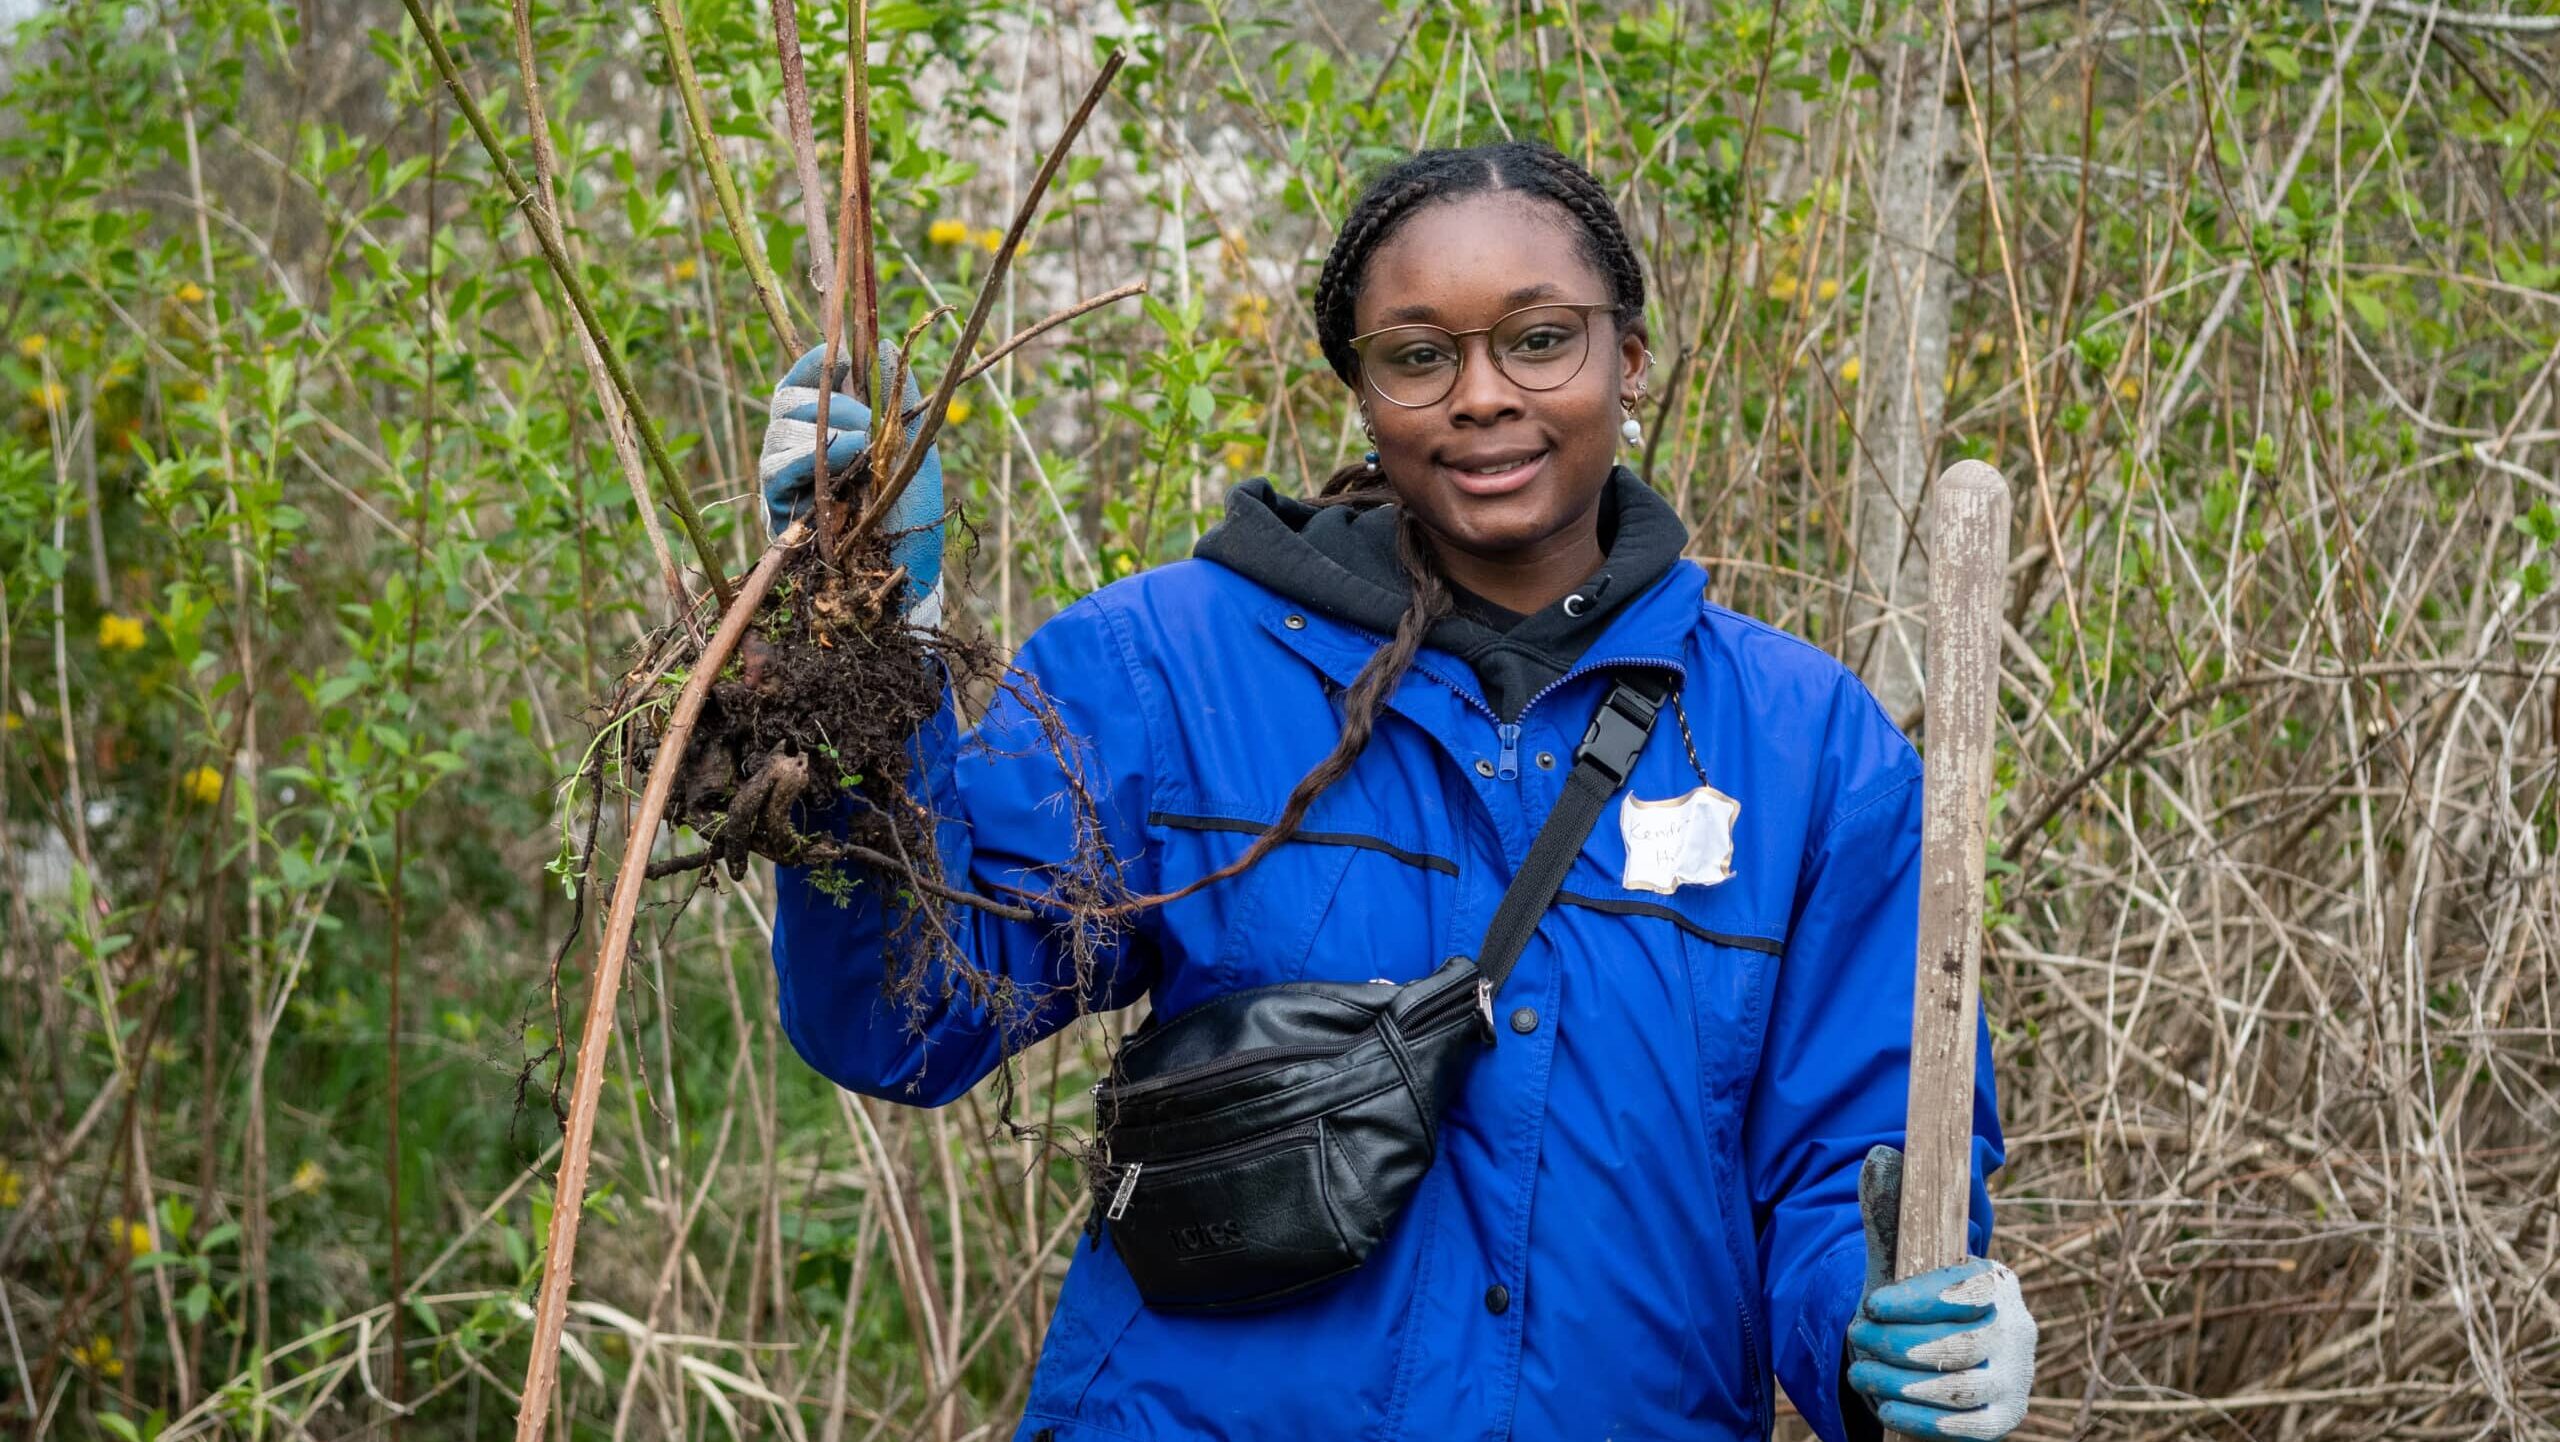 A 21 Acres volunteer with the giant blackberry root that she dug up